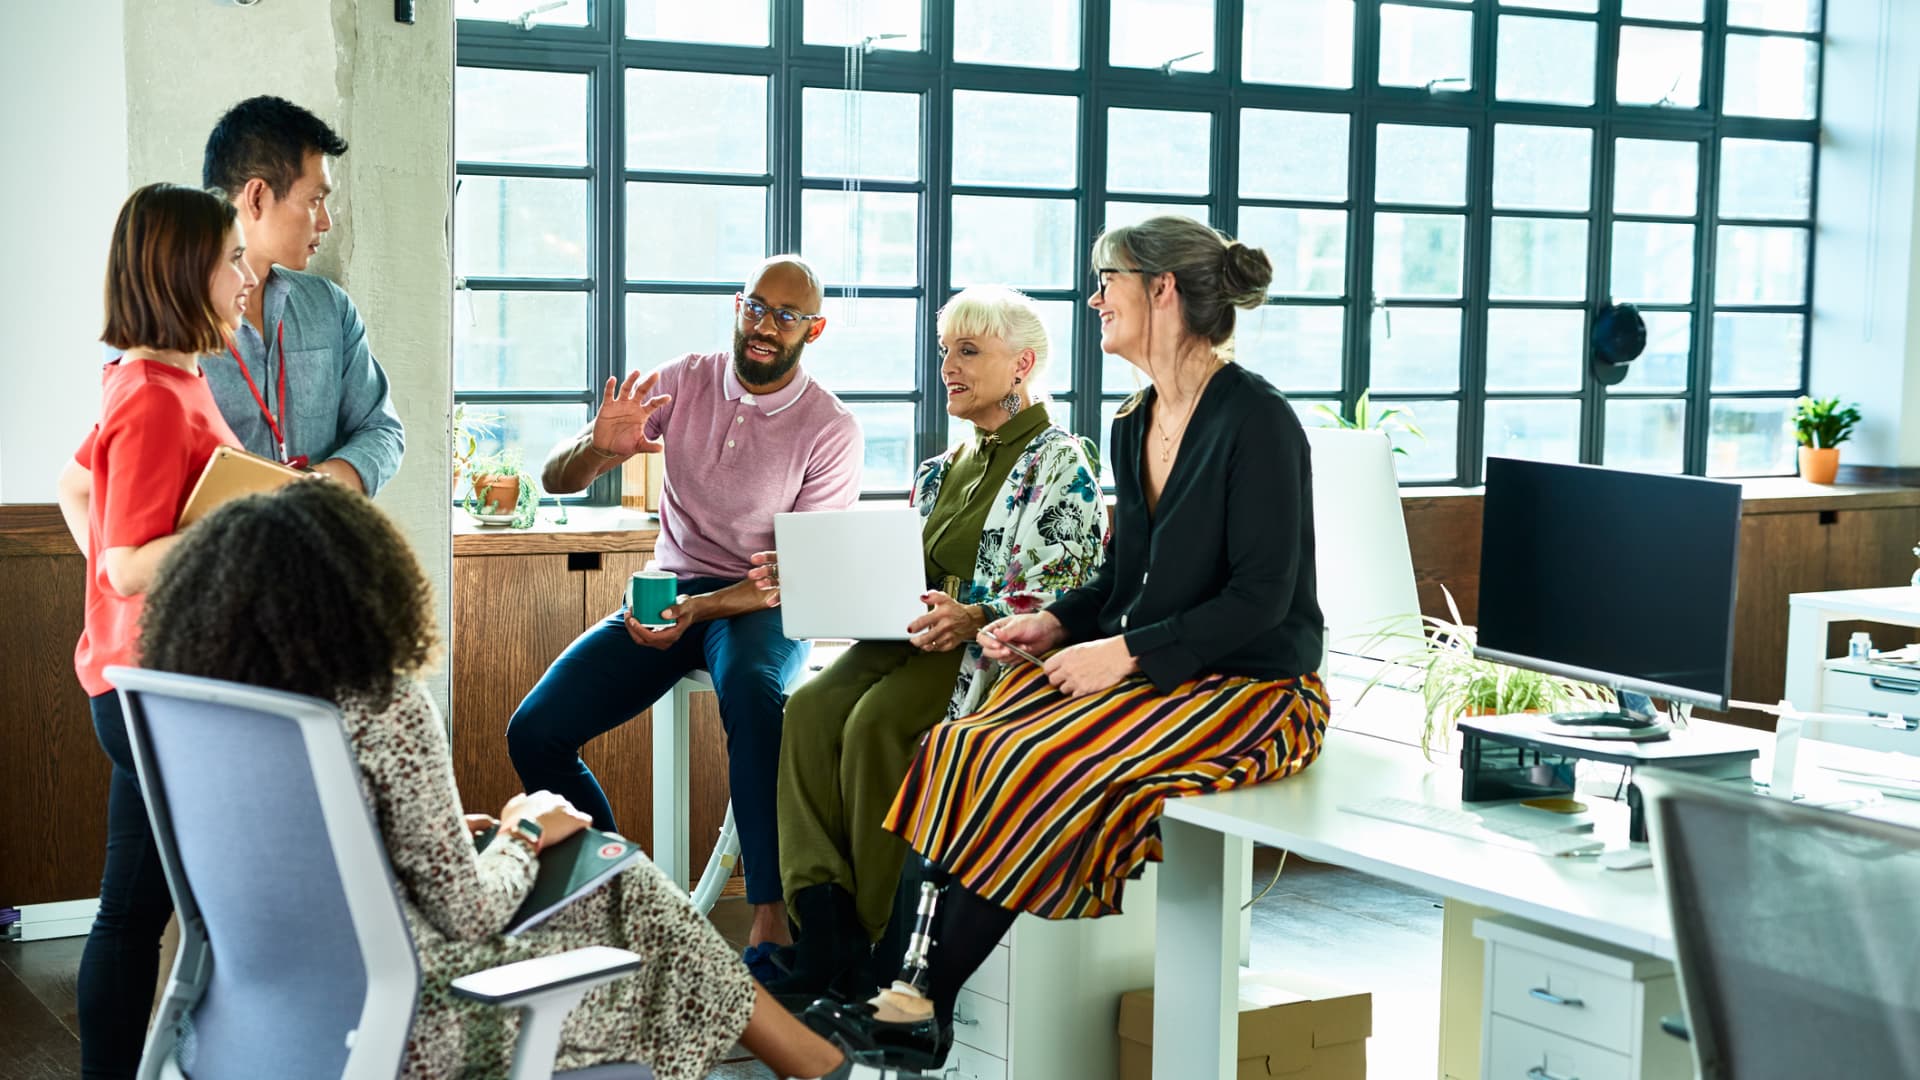 6 tips for creating strong work connections in a hybrid office, according to an expert